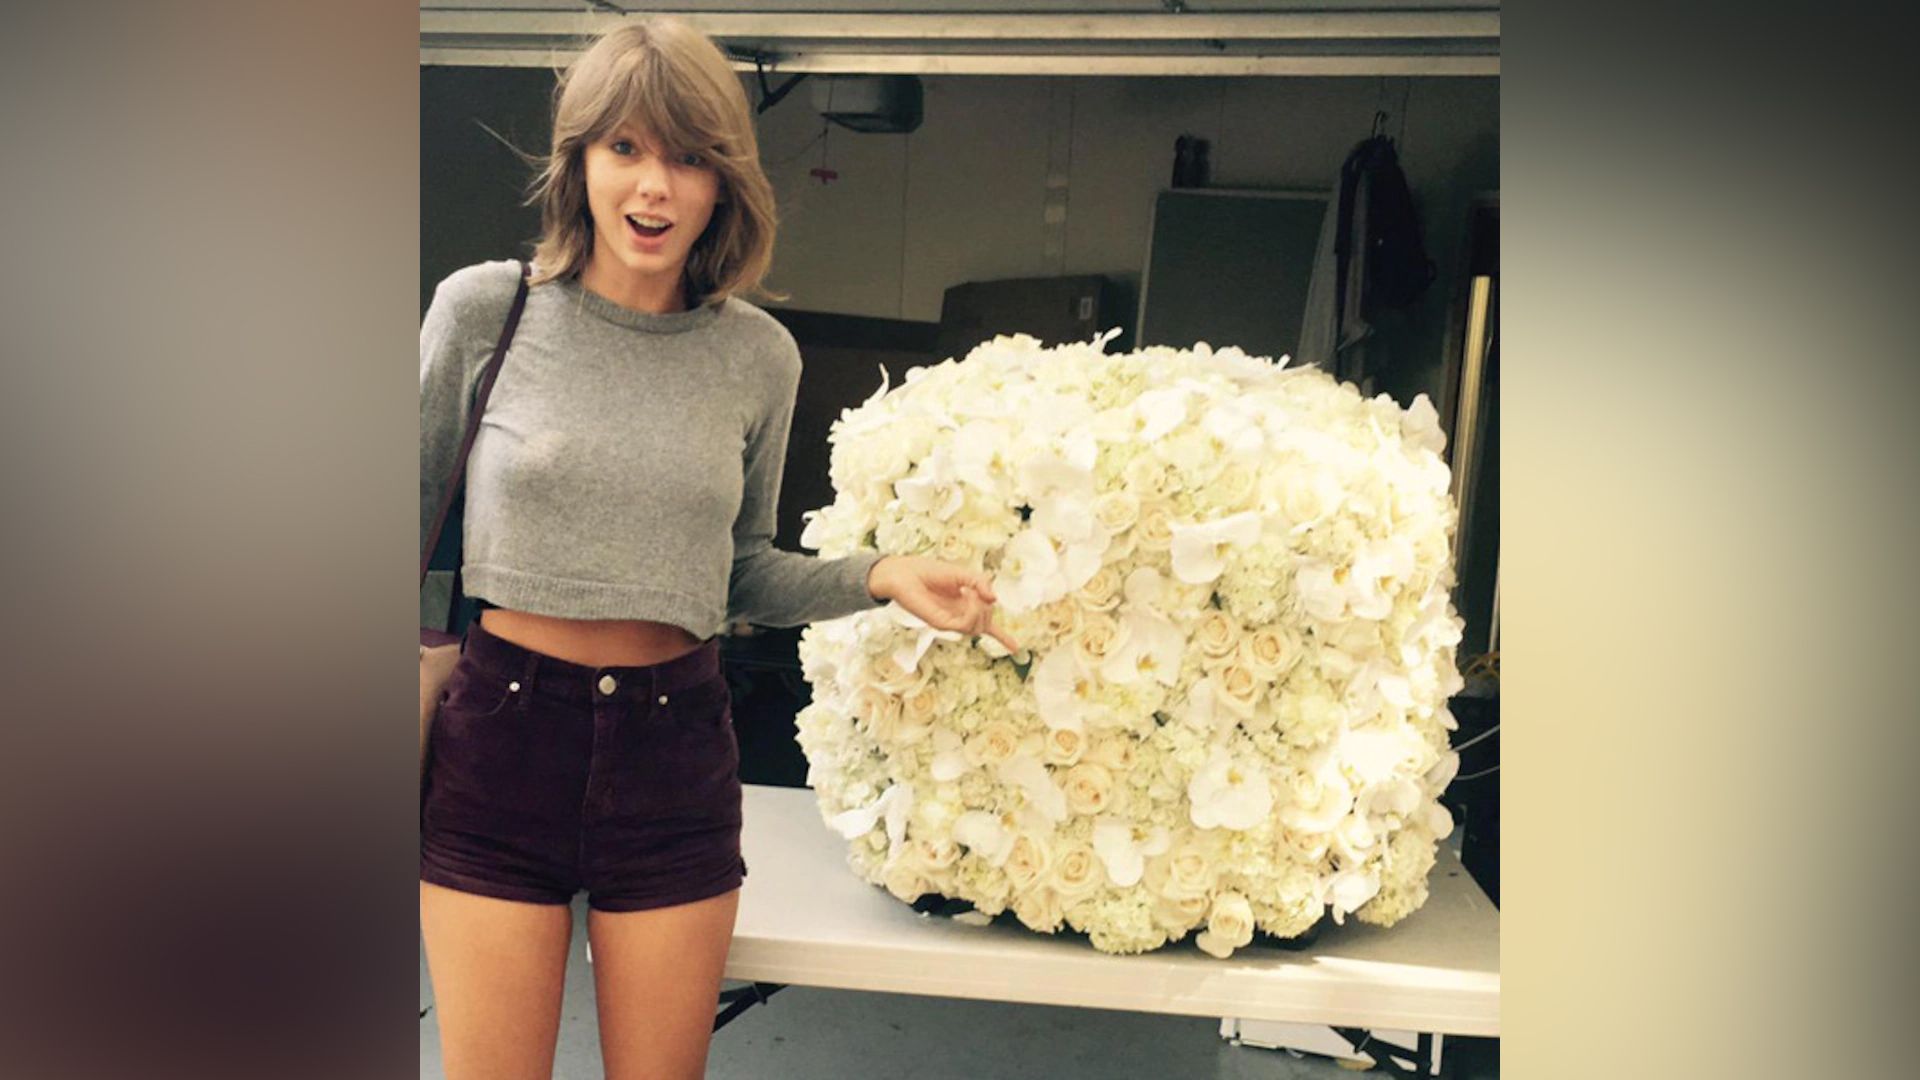 The bouquet that Taylor Swift got from Kanye West